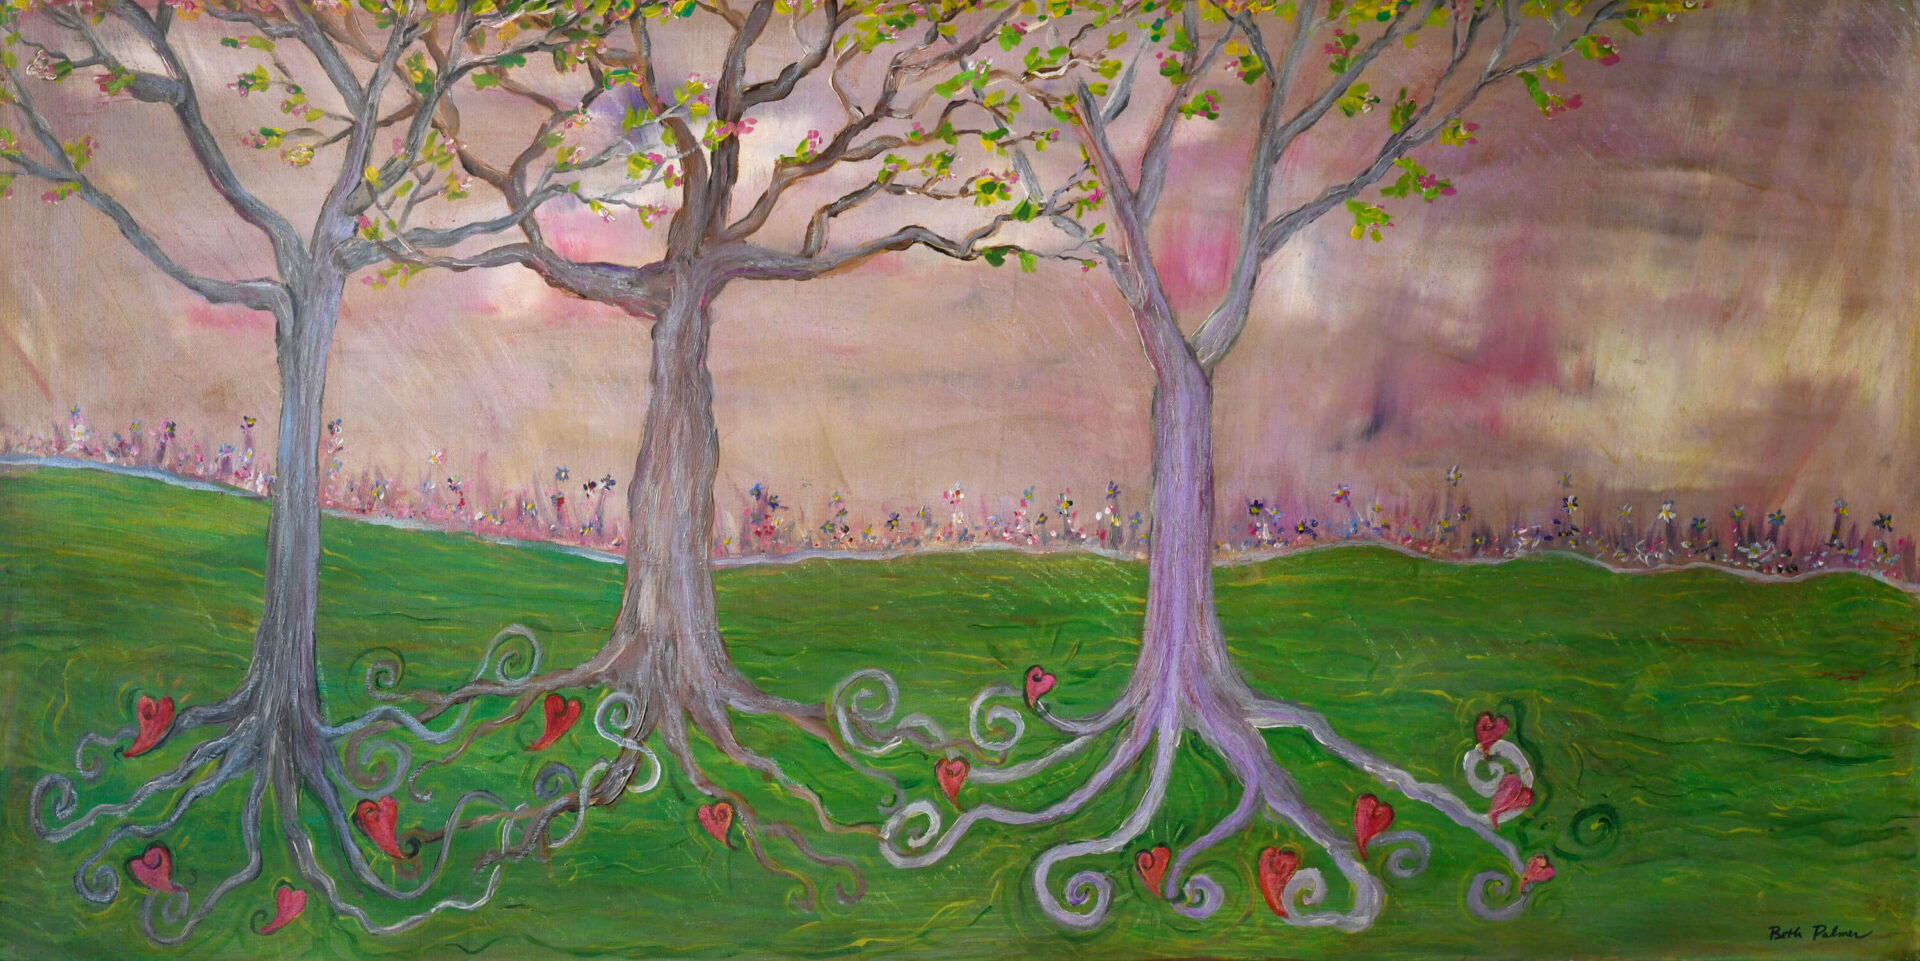 A Canvas painting of trees and flowers